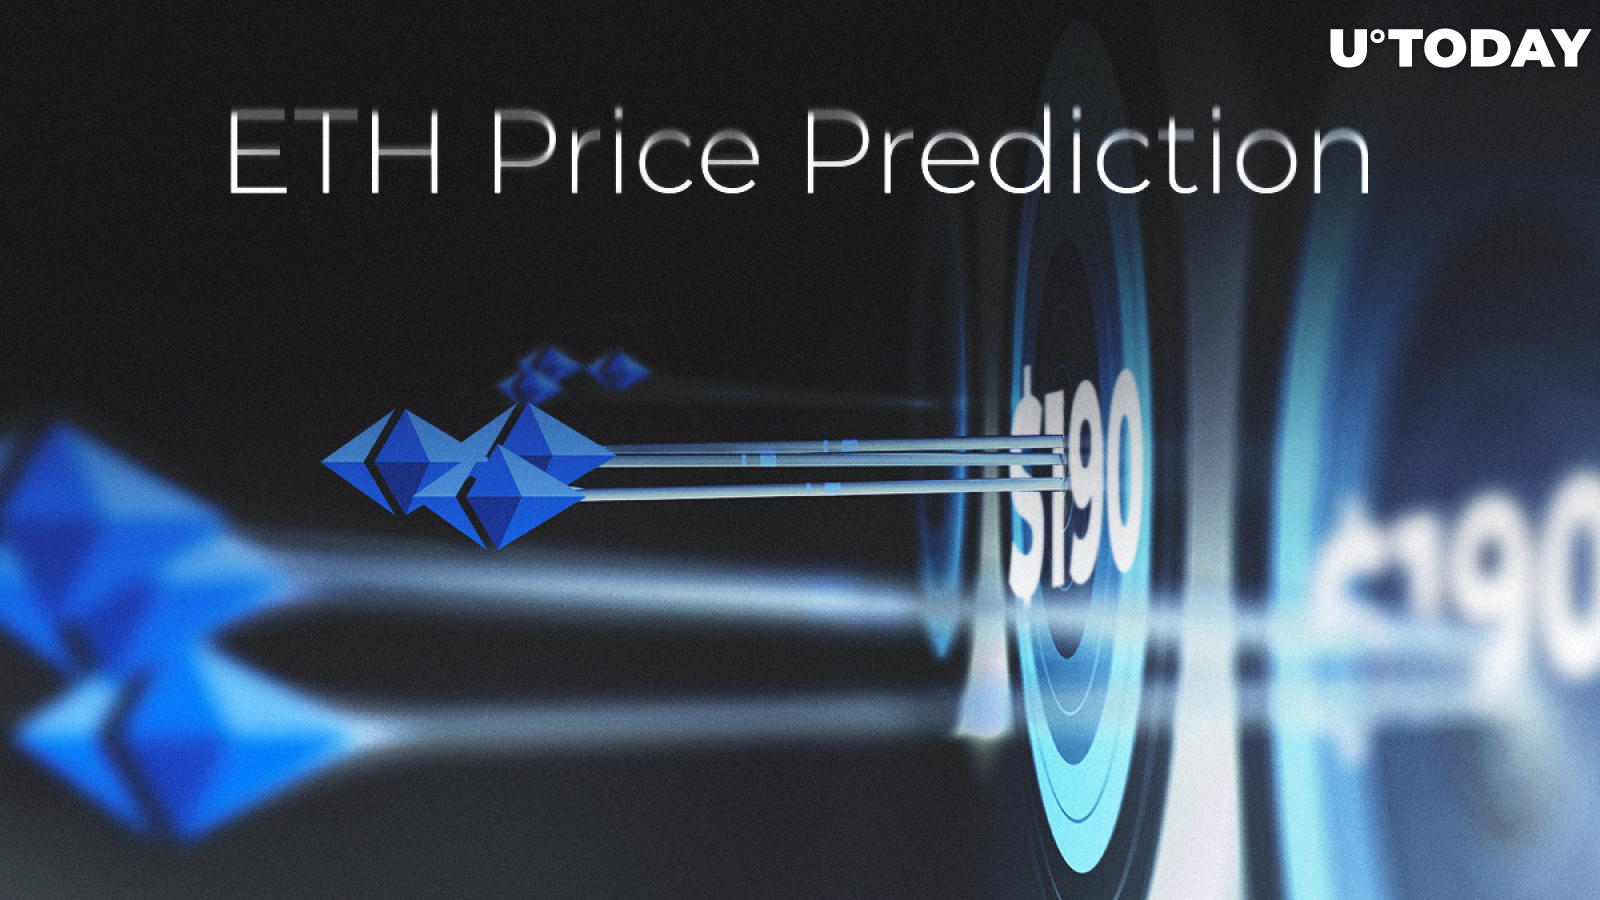 ETH Price Prediction: $190 Target? Easy-Breezy! How to Earn on Ethereum’s Ups and Downs?